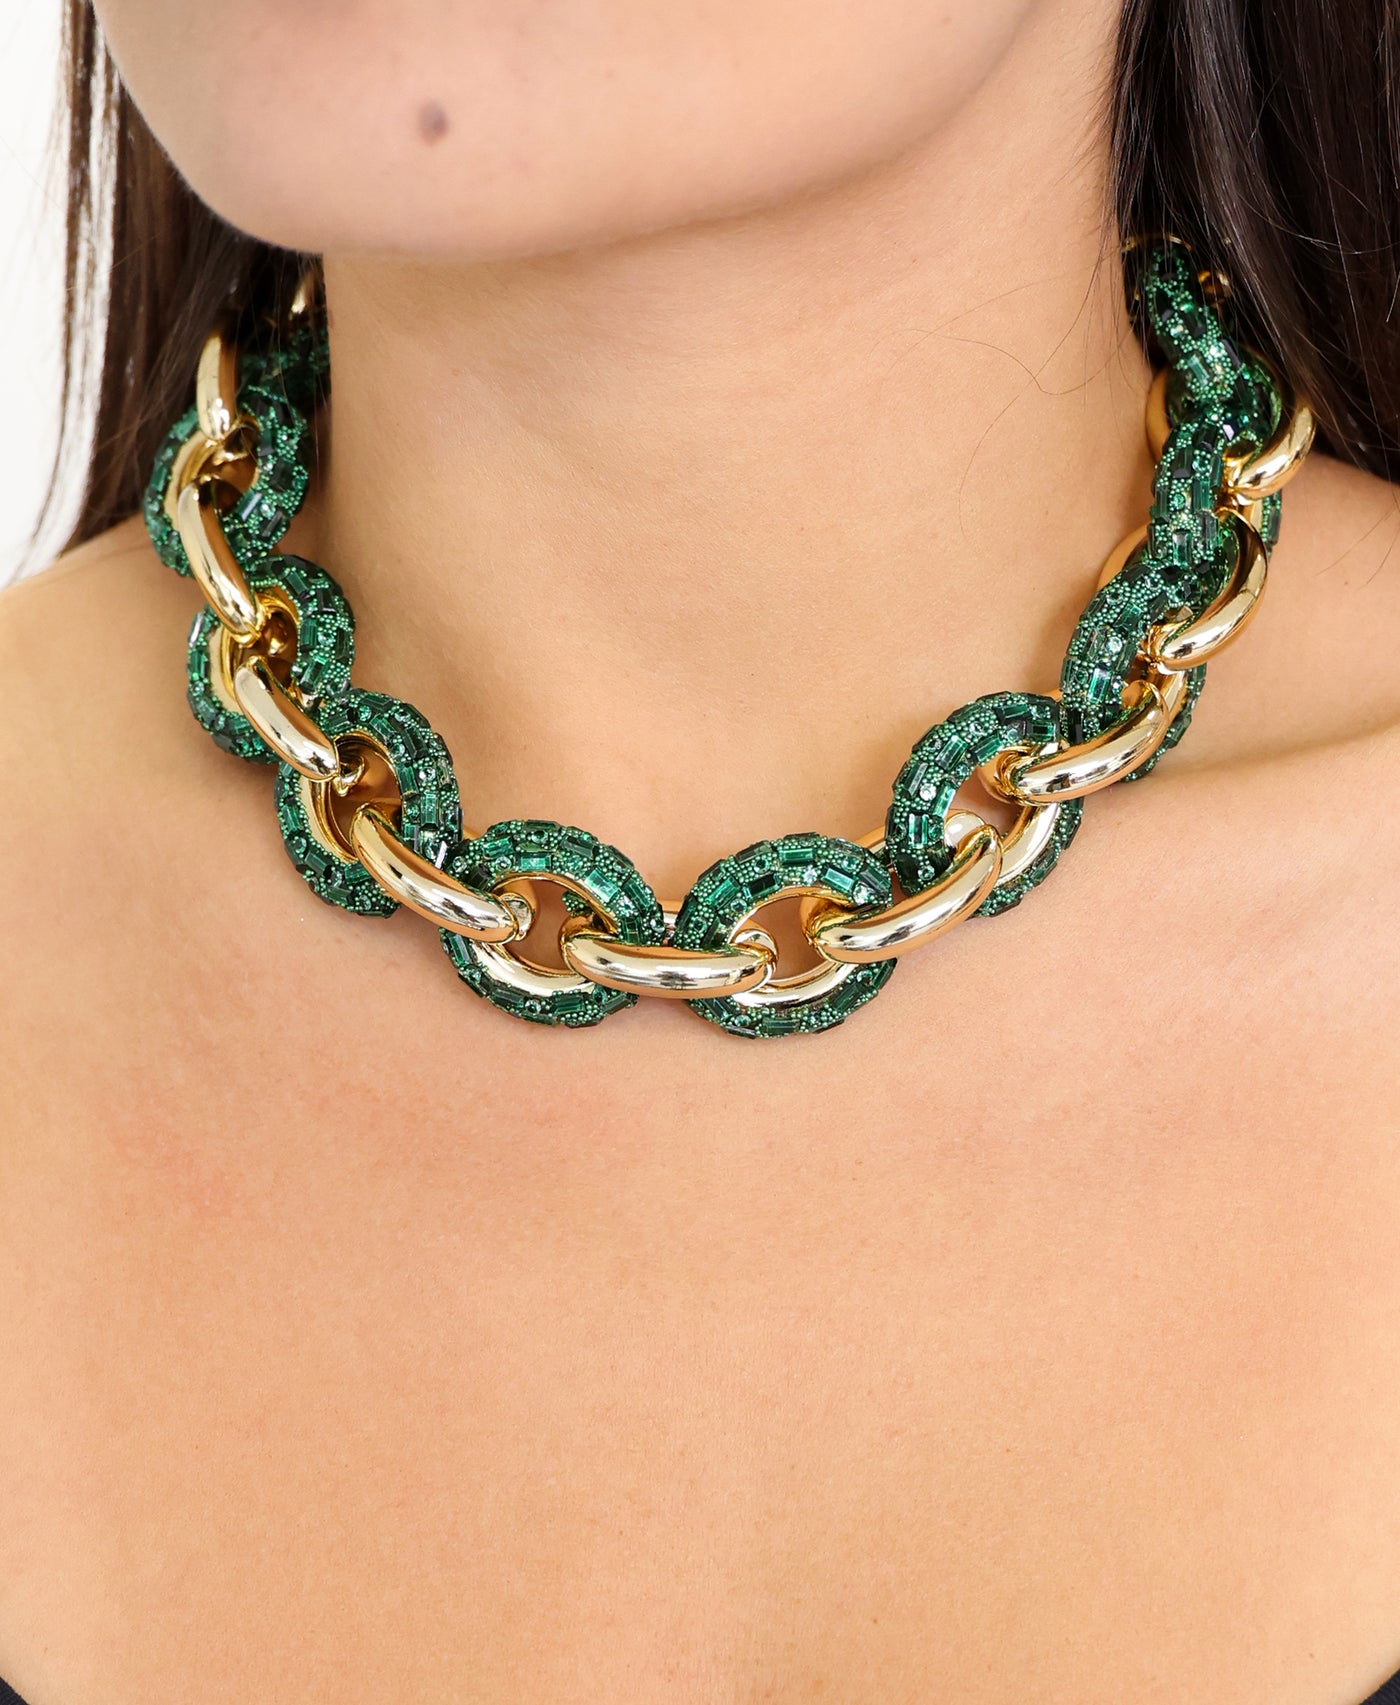 Chunky Chain w/ Crystals Collar Necklace image 1